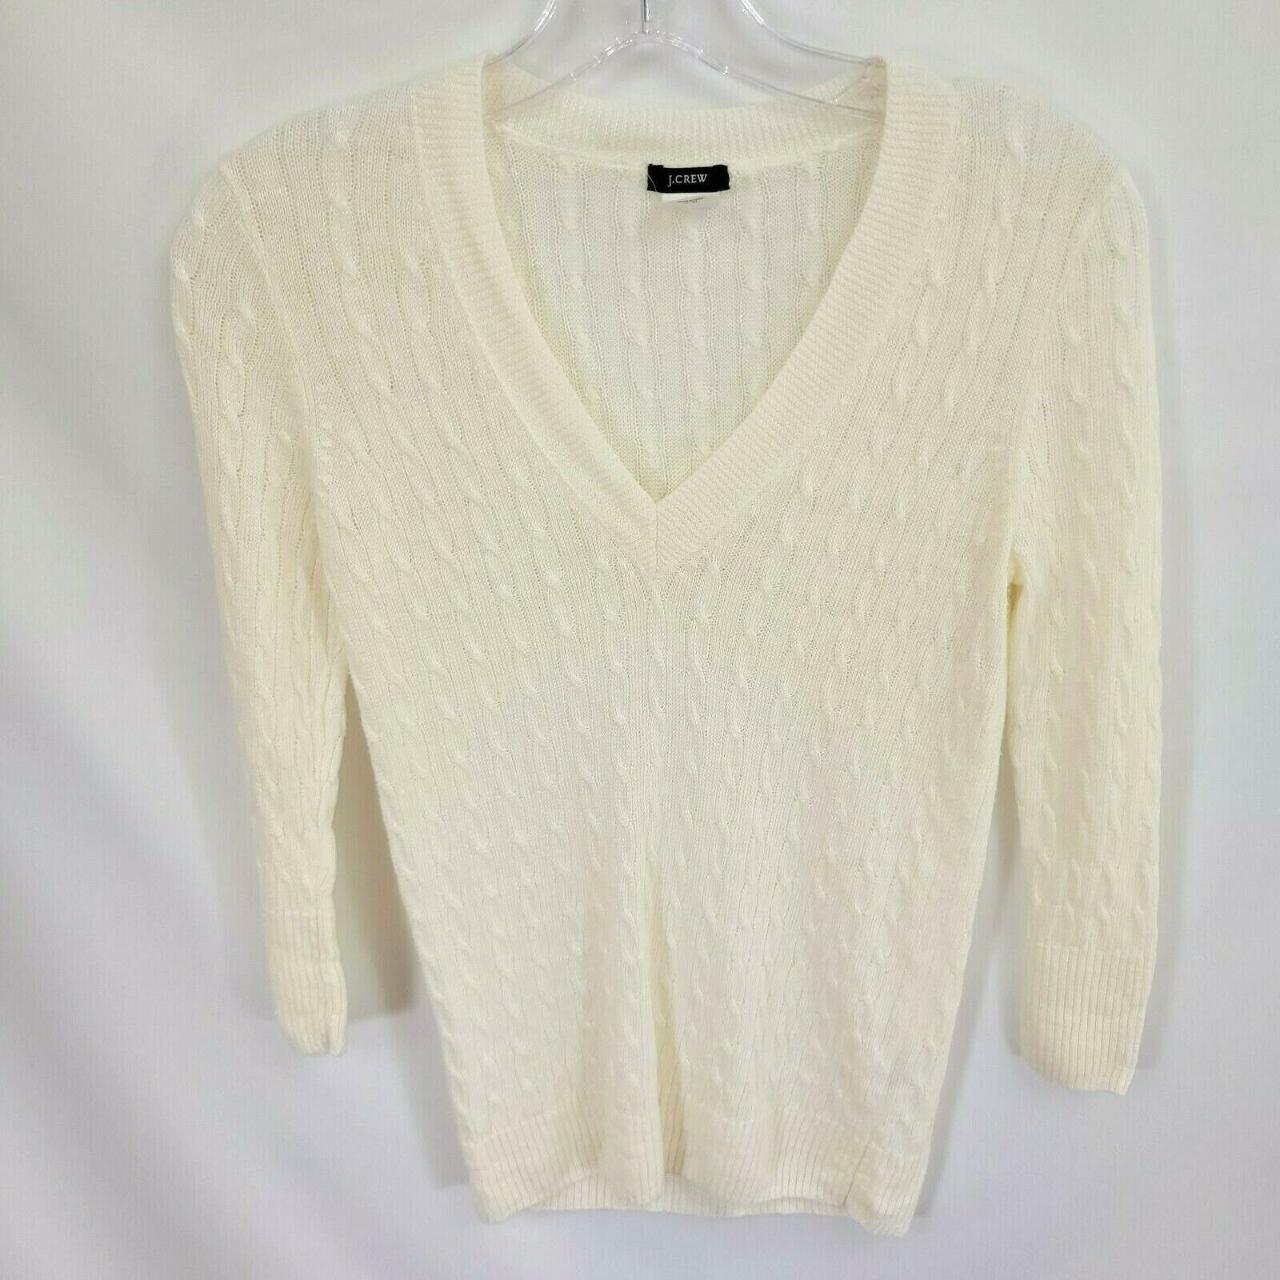 J. Crew XS Thin Cable Knit Sweater Long Sleeve 100%... - Depop